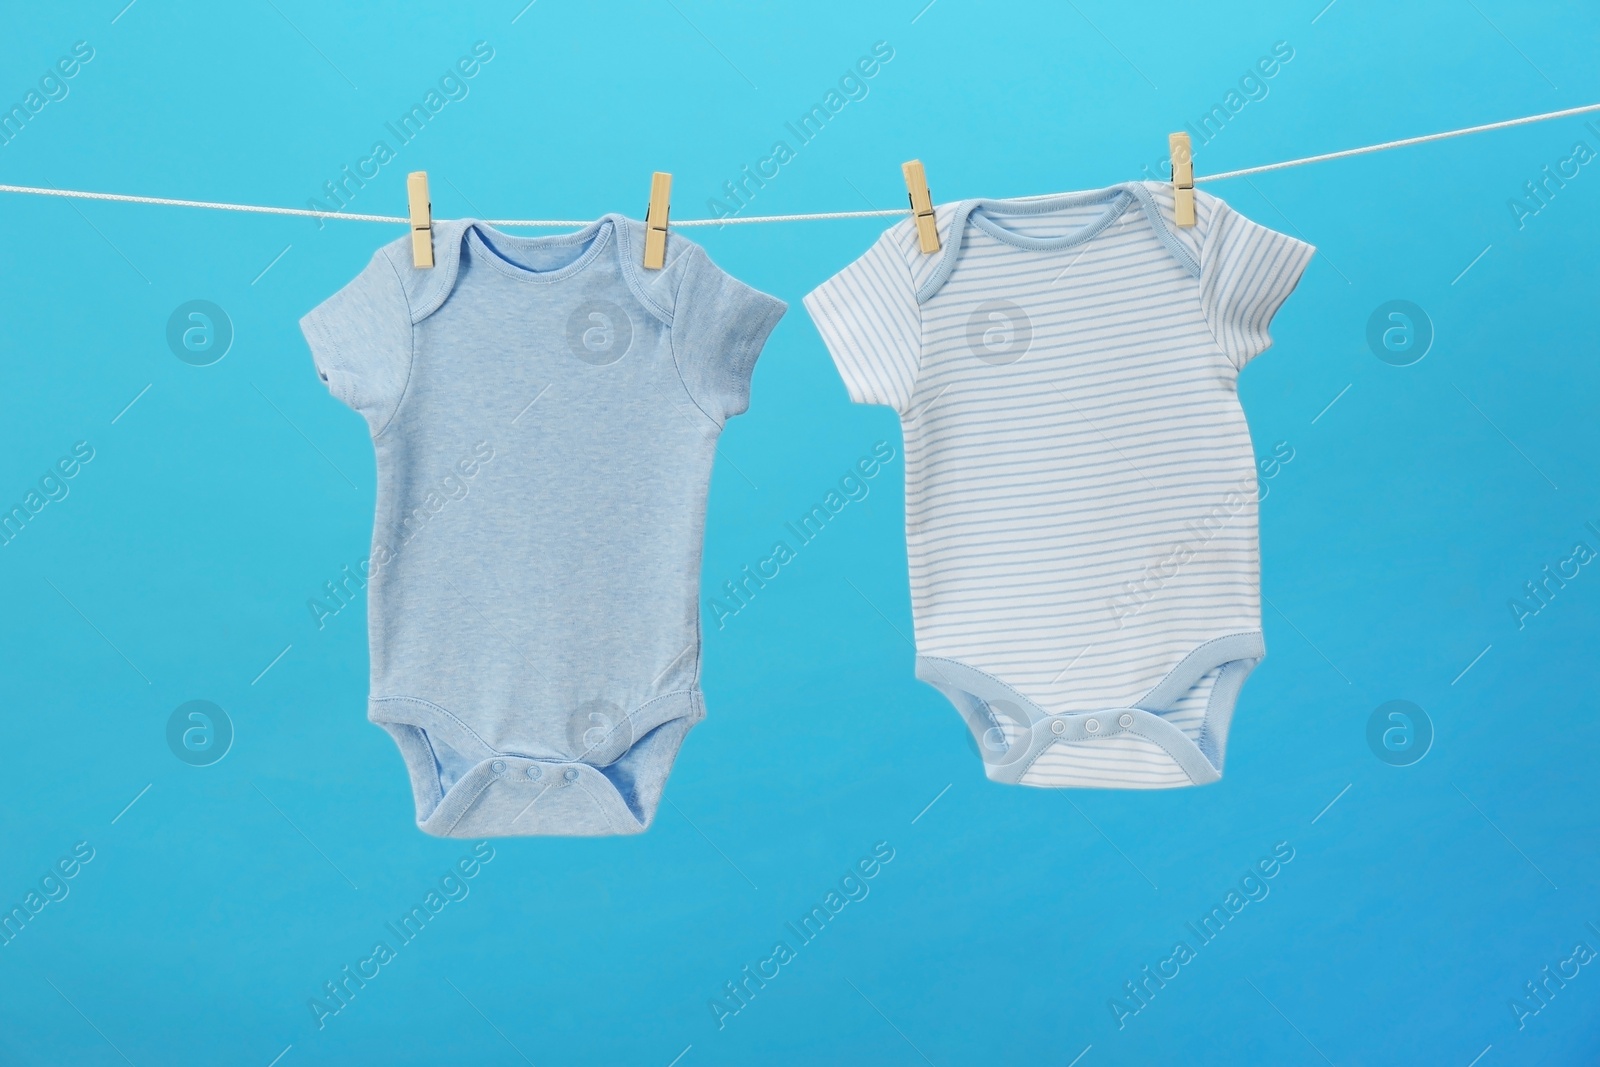 Photo of Baby onesies hanging on clothes line against blue background. Laundry day